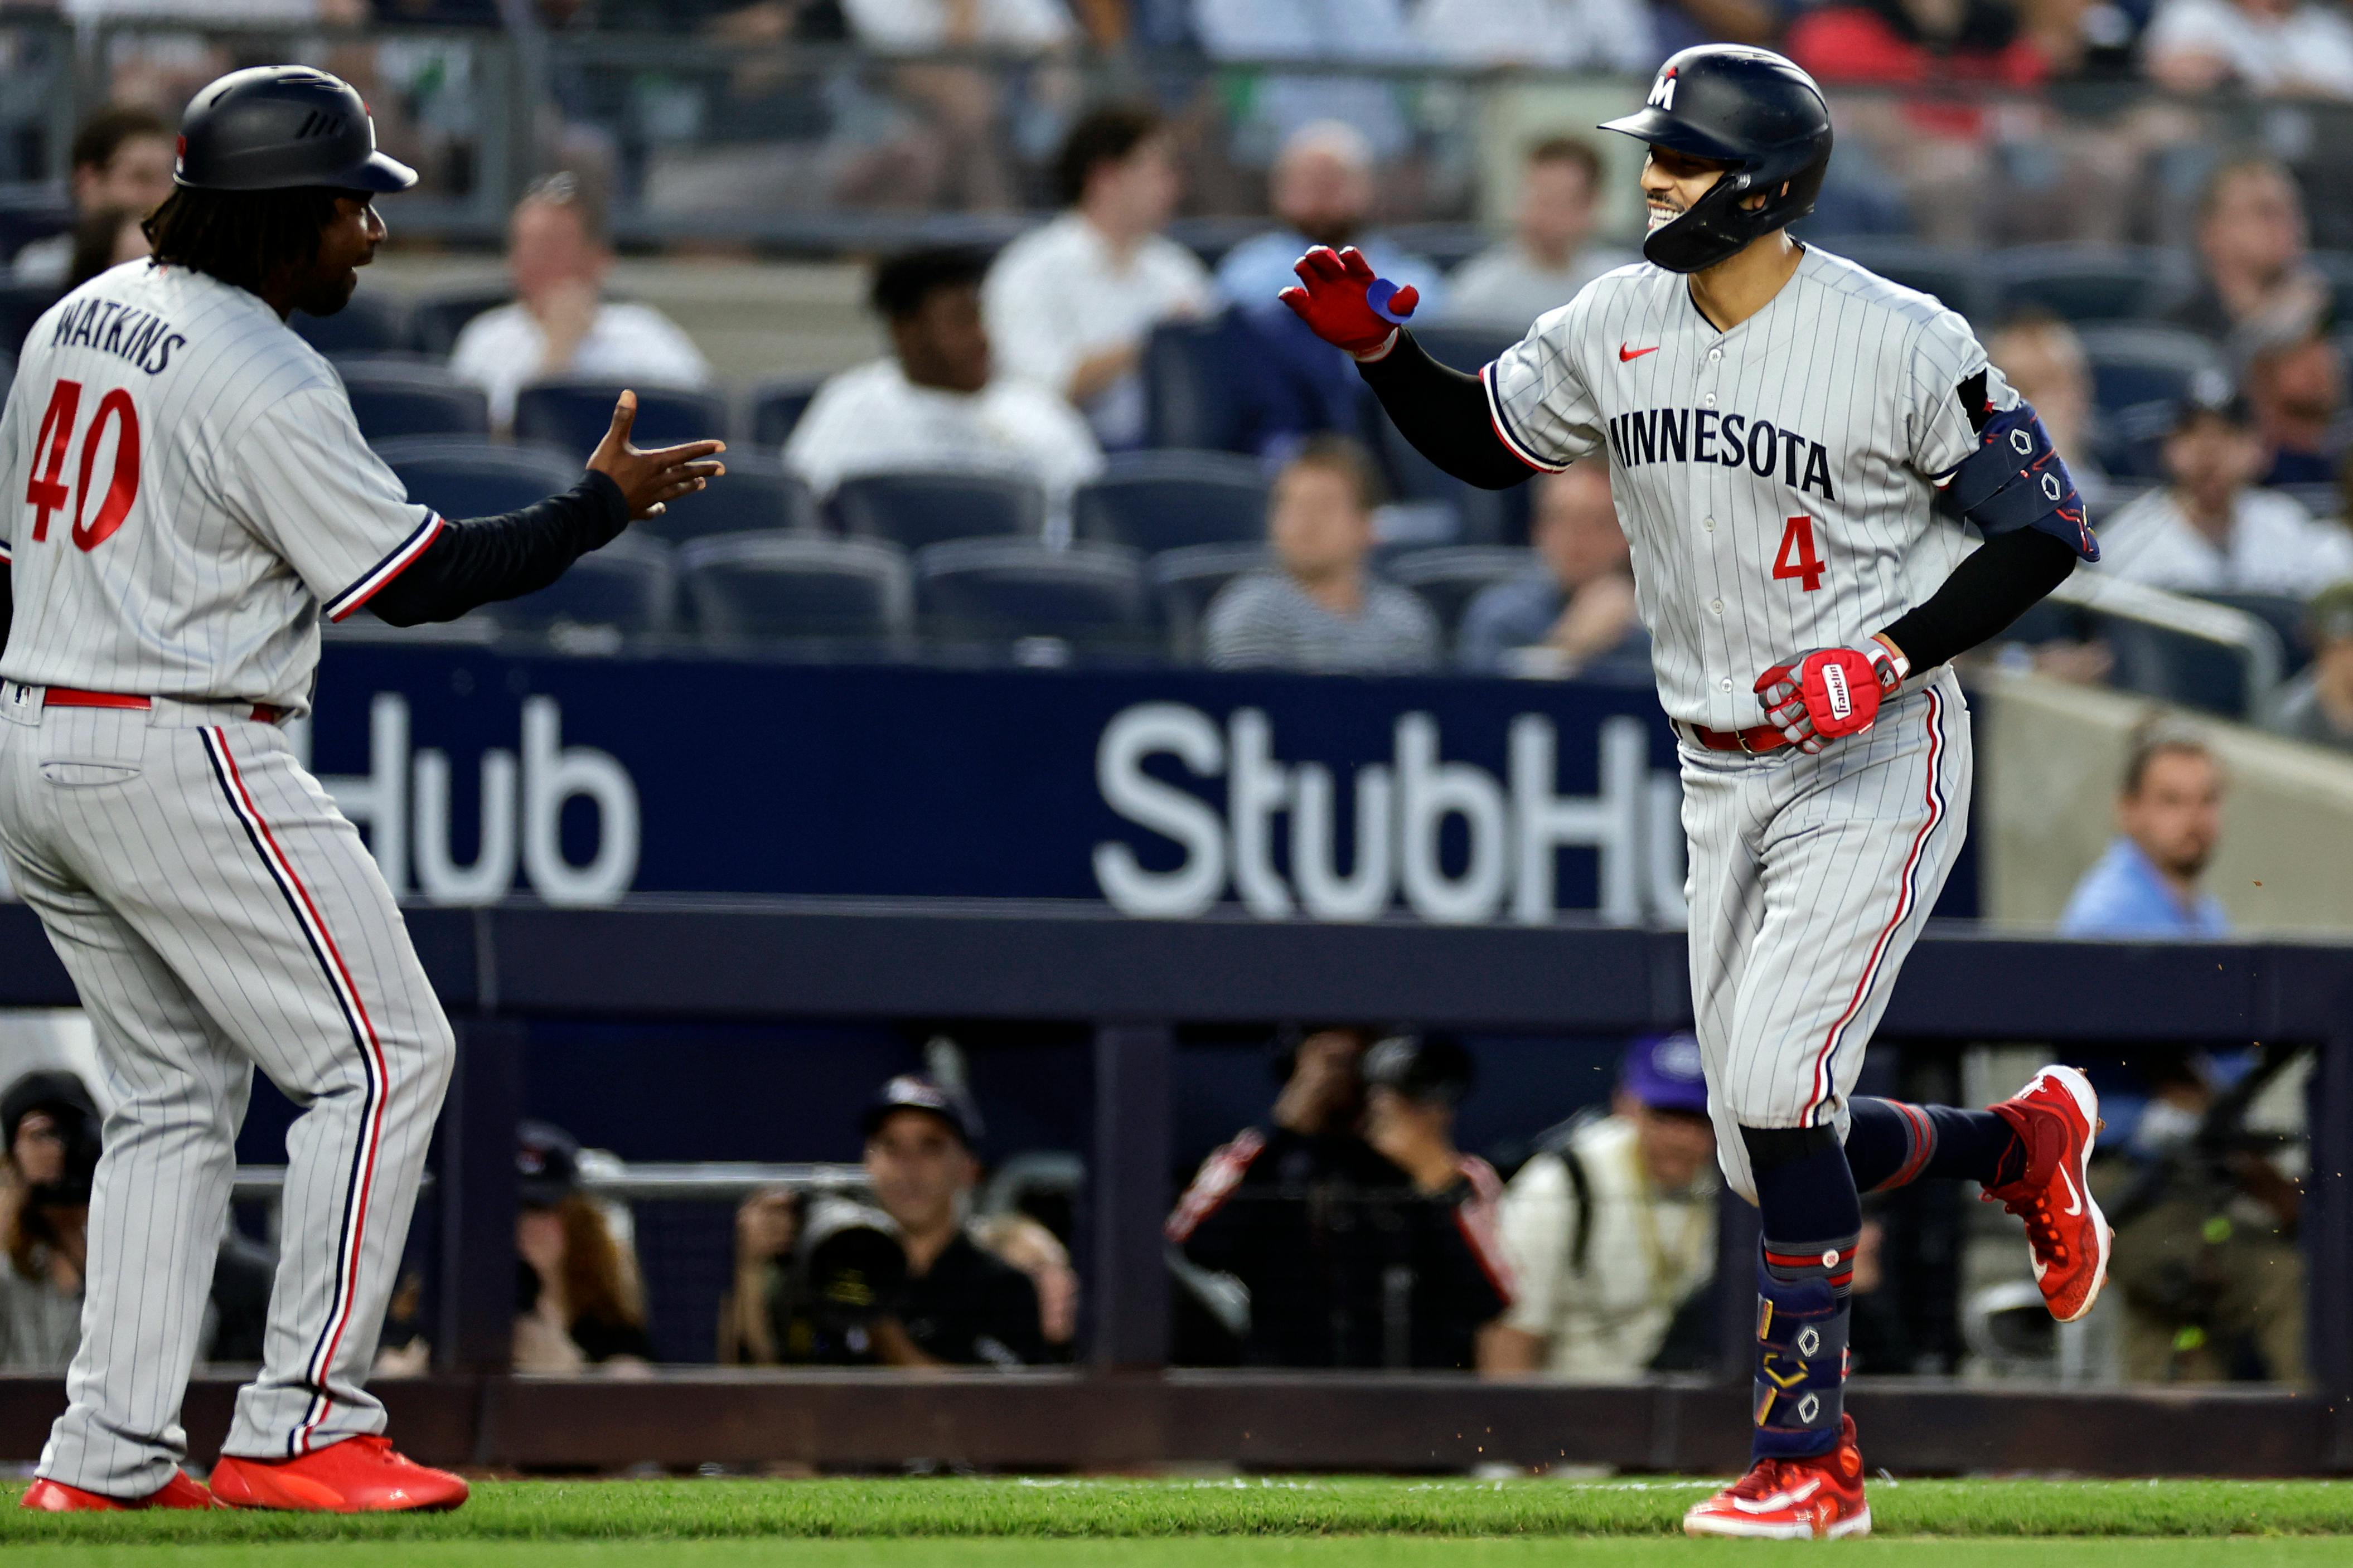 Nine-run first inning sends Twins to rout of Yankees